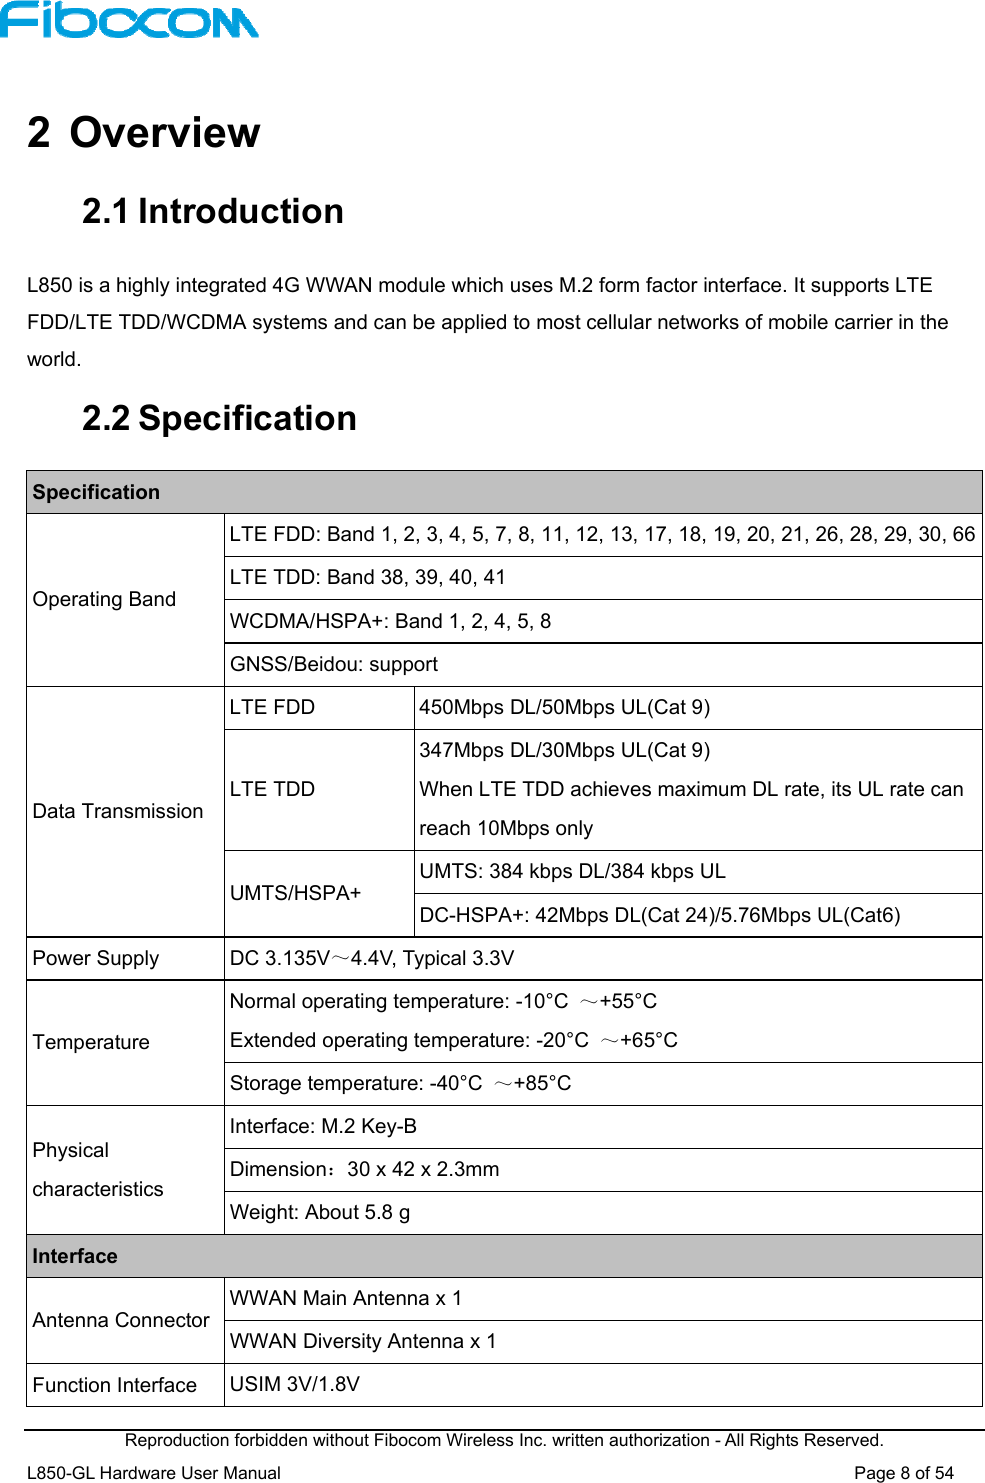  Reproduction forbidden without Fibocom Wireless Inc. written authorization - All Rights Reserved. L850-GL Hardware User Manual                                                                 Page 8 of 54  2  Overview 2.1 Introduction L850 is a highly integrated 4G WWAN module which uses M.2 form factor interface. It supports LTE FDD/LTE TDD/WCDMA systems and can be applied to most cellular networks of mobile carrier in the world. 2.2 Specification Specification Operating Band LTE FDD: Band 1, 2, 3, 4, 5, 7, 8, 11, 12, 13, 17, 18, 19, 20, 21, 26, 28, 29, 30, 66LTE TDD: Band 38, 39, 40, 41 WCDMA/HSPA+: Band 1, 2, 4, 5, 8 GNSS/Beidou: support Data Transmission LTE FDD  450Mbps DL/50Mbps UL(Cat 9) LTE TDD 347Mbps DL/30Mbps UL(Cat 9) When LTE TDD achieves maximum DL rate, its UL rate can reach 10Mbps only   UMTS/HSPA+  UMTS: 384 kbps DL/384 kbps UL DC-HSPA+: 42Mbps DL(Cat 24)/5.76Mbps UL(Cat6) Power Supply  DC 3.135V～4.4V, Typical 3.3V Temperature Normal operating temperature: -10°C  ～+55°C Extended operating temperature: -20°C  ～+65°C Storage temperature: -40°C  ～+85°C Physical characteristics Interface: M.2 Key-B Dimension：30 x 42 x 2.3mm Weight: About 5.8 g Interface Antenna Connector  WWAN Main Antenna x 1 WWAN Diversity Antenna x 1 Function Interface  USIM 3V/1.8V 